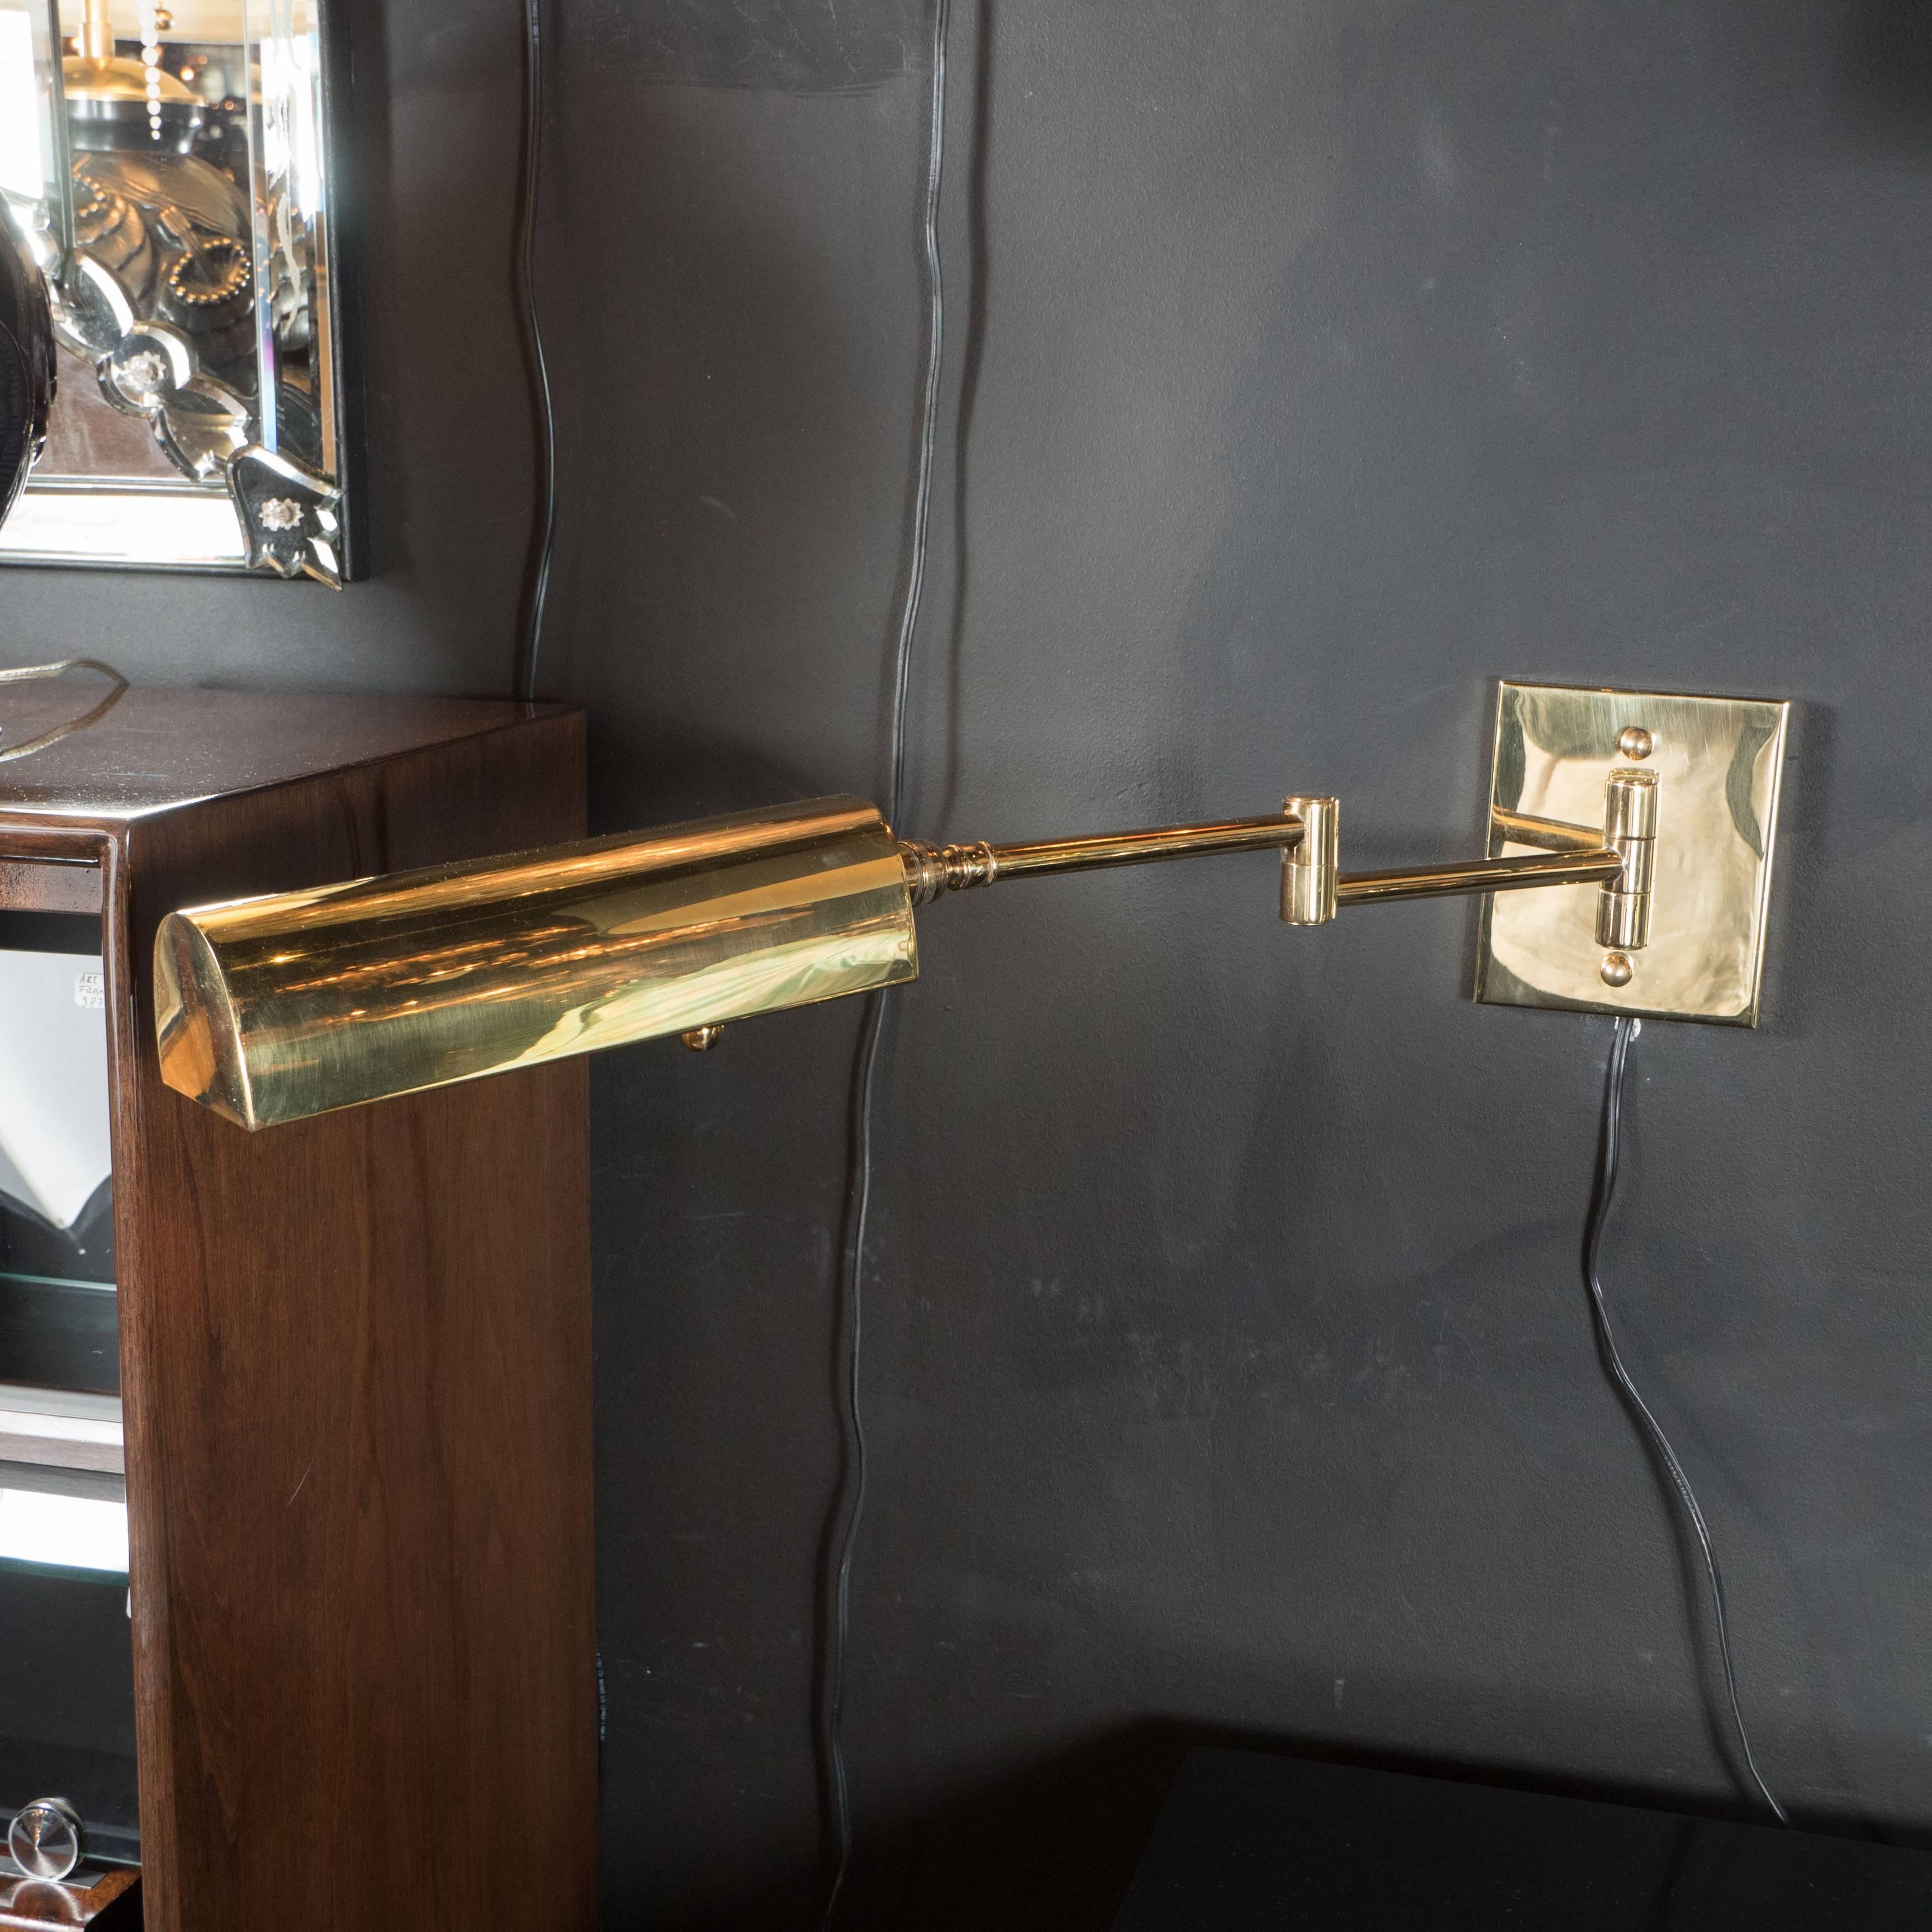 These very sleek and sophisticated sconces feature a swing arm design in high quality solid brass. The brass shade of the sconce pivots so one can adjust the light. They will blend beautifully with all decors. They retain there original Boyd